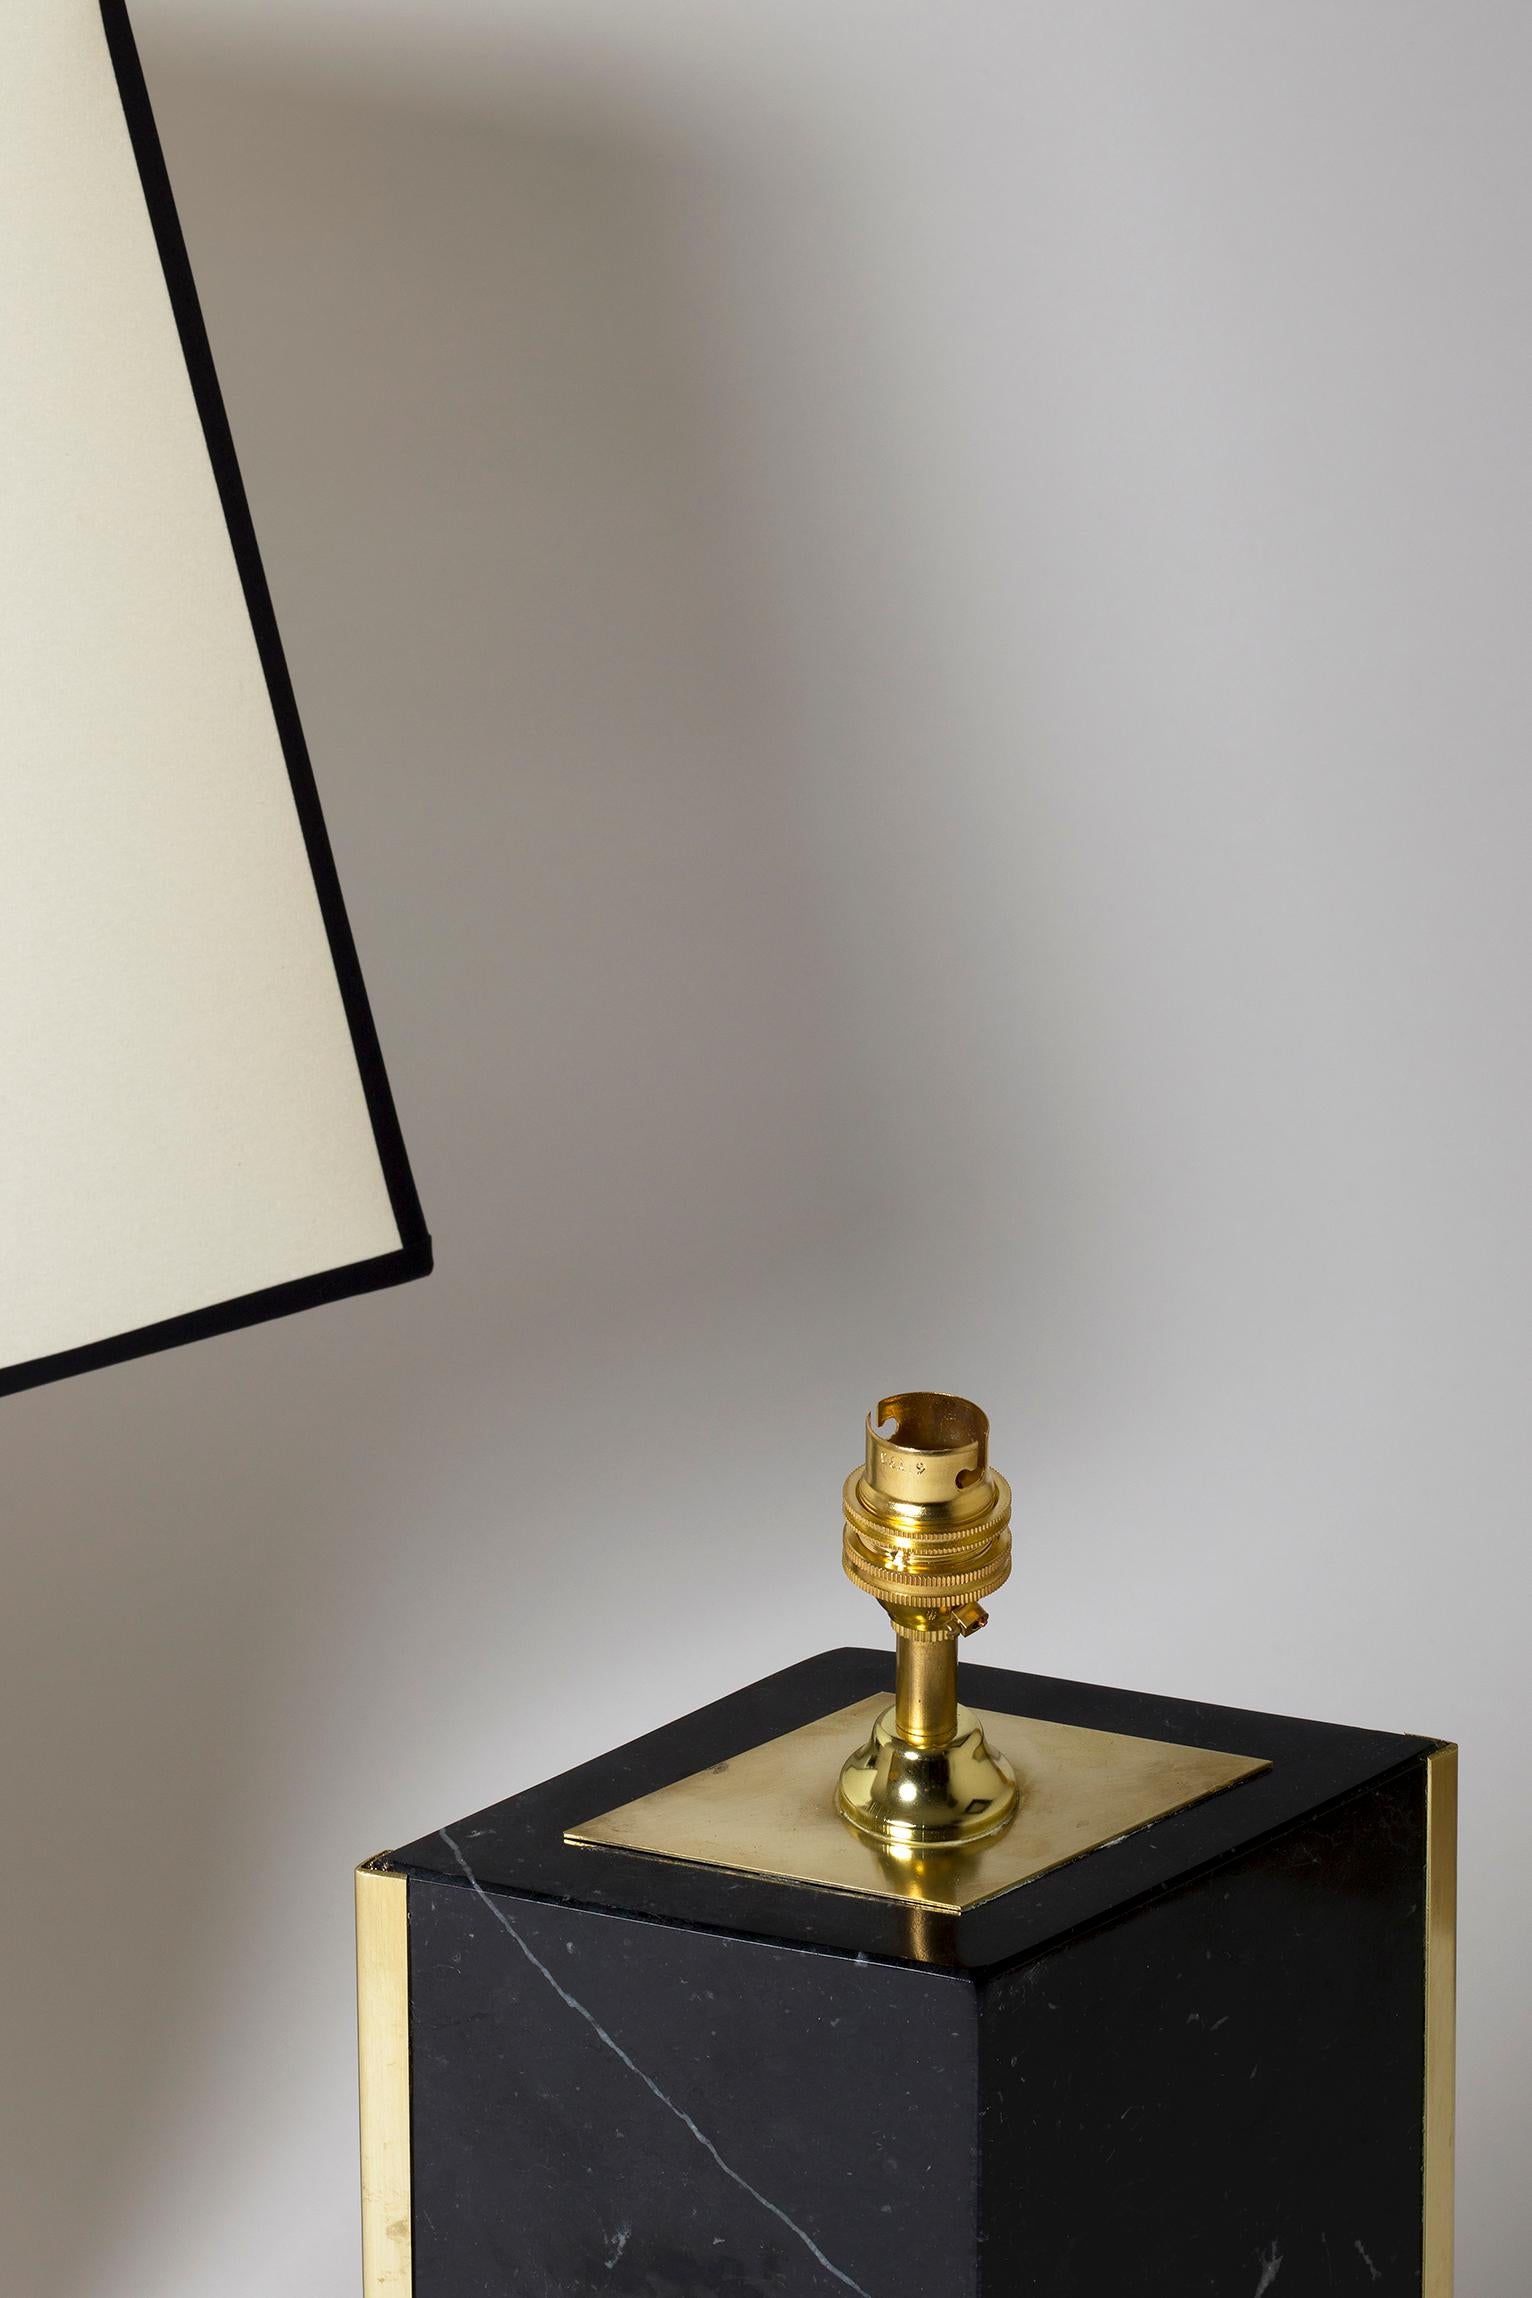 Pair of Black Marble and Brass Table Lamp, by Dorian Caffot de Fawes 3